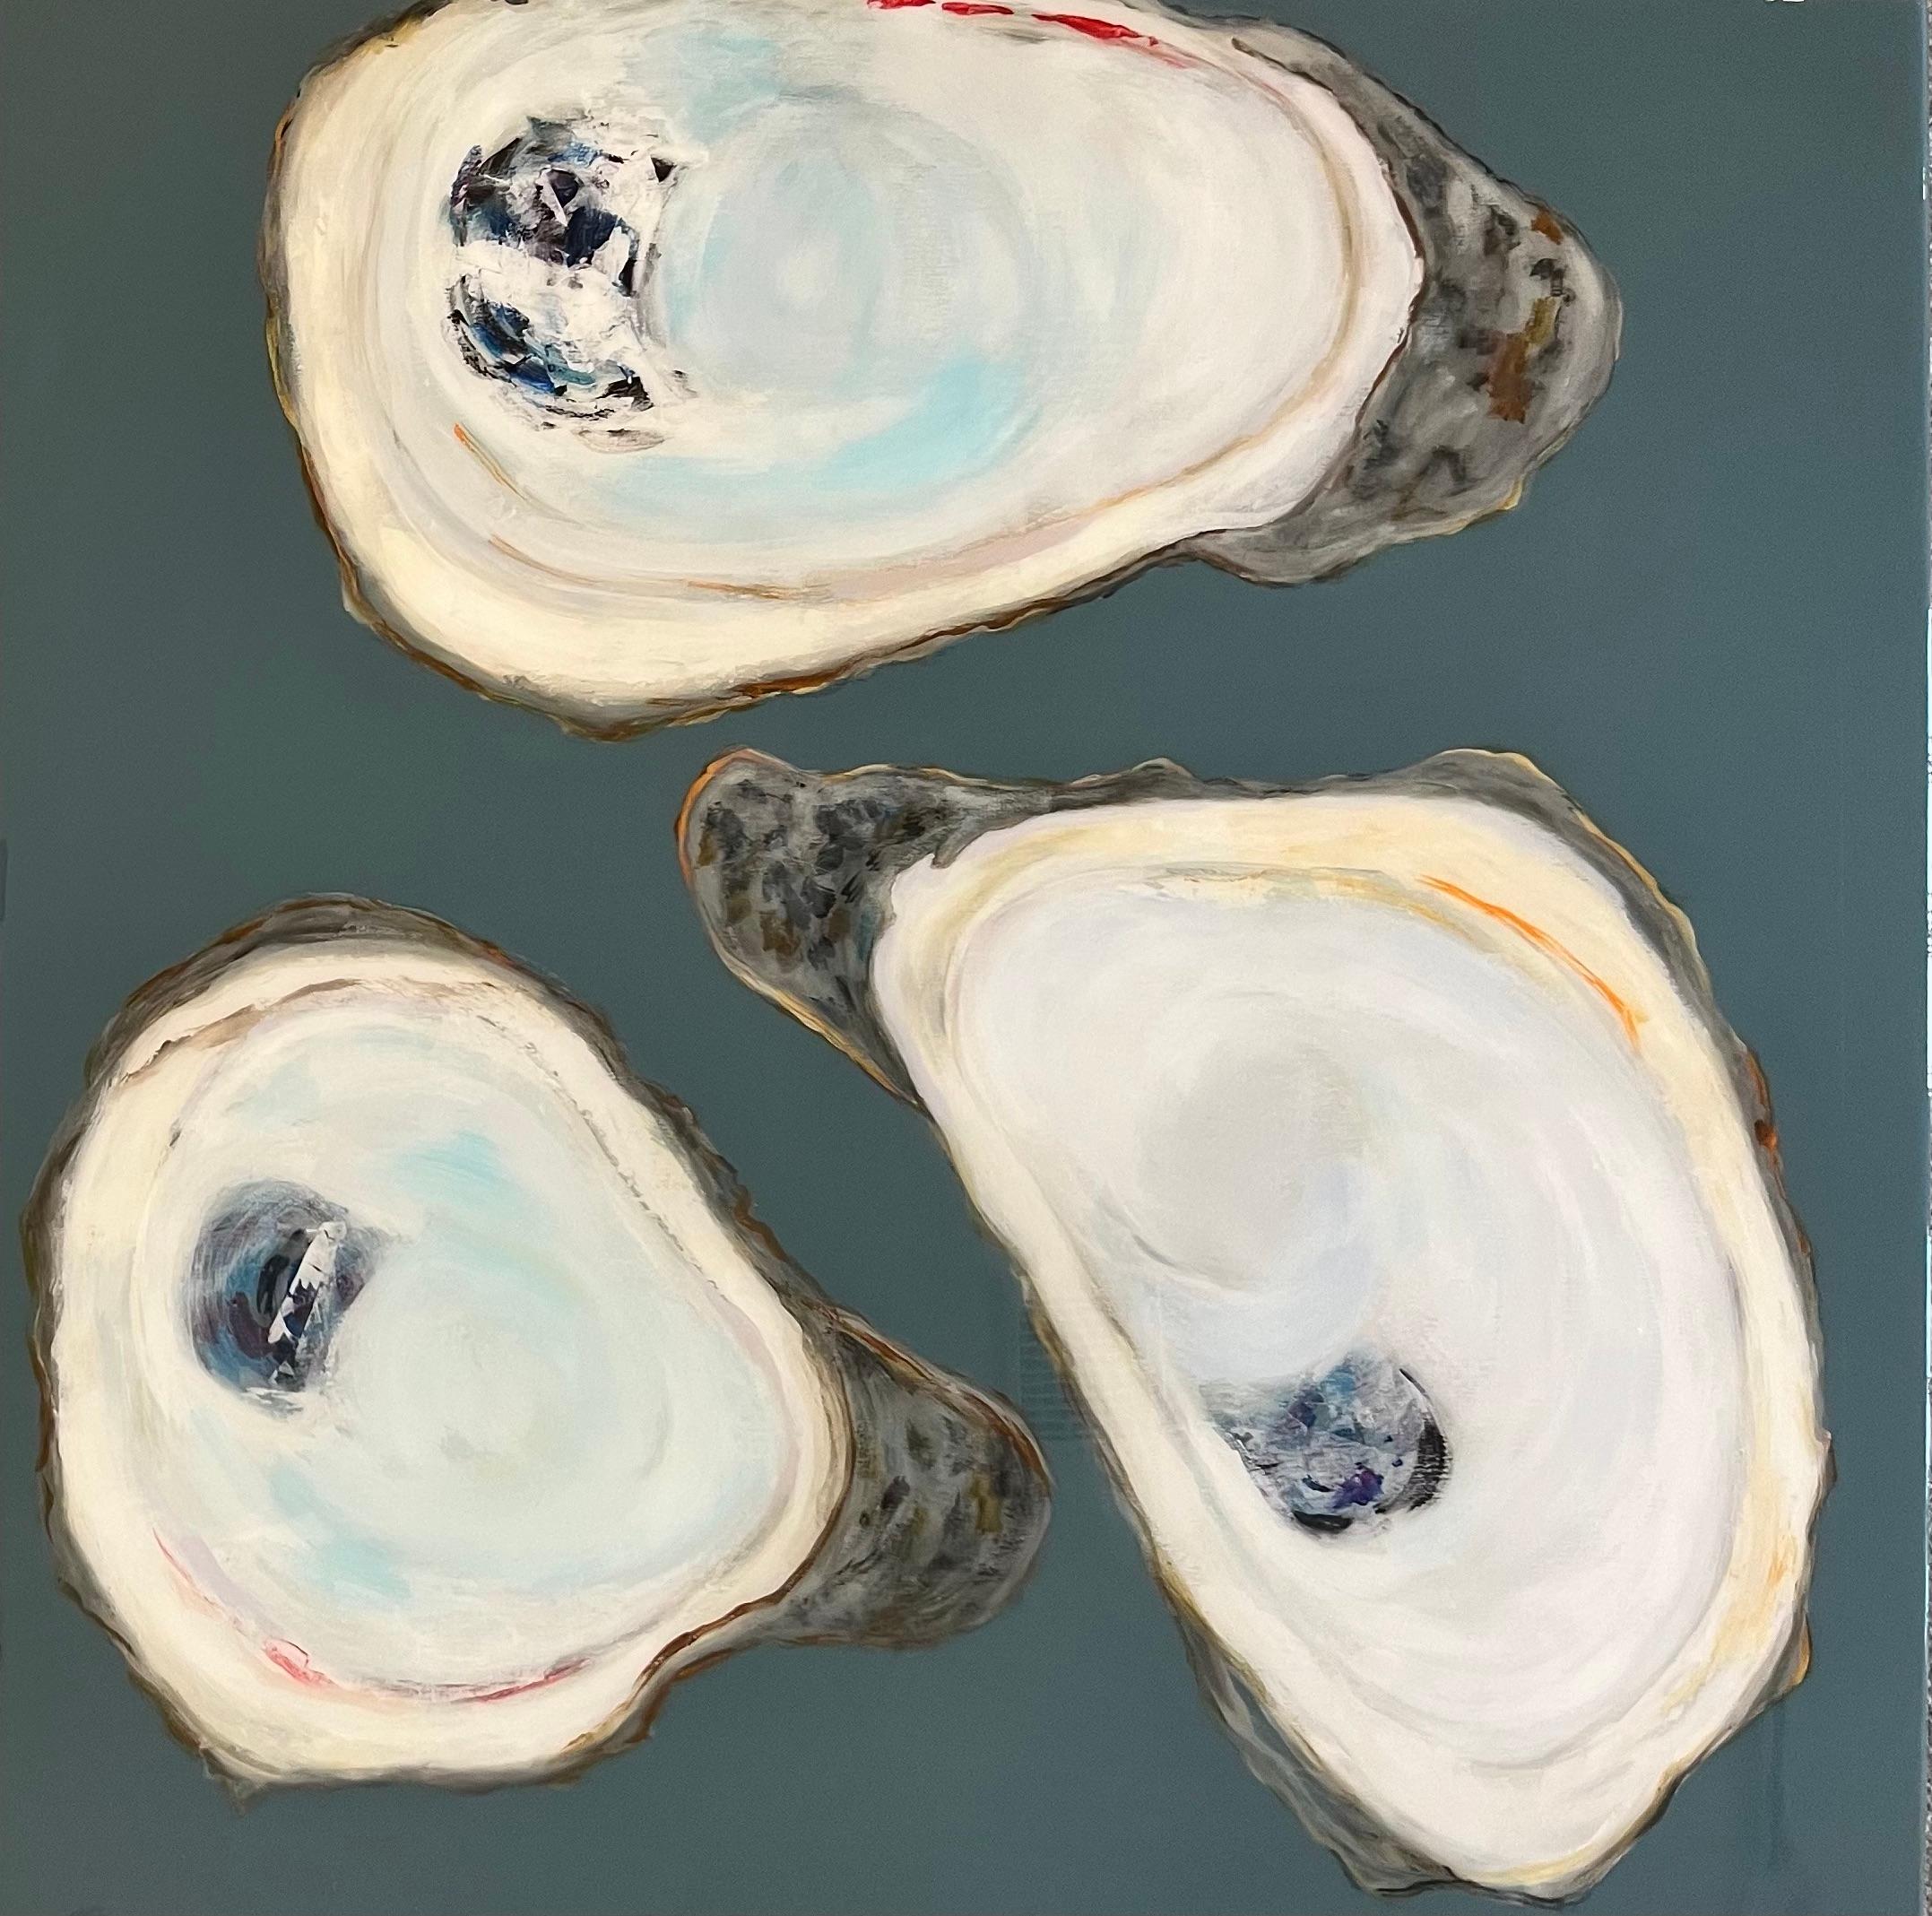 Anne Harney Still-Life Painting - "Wild Oysters" Mixed media painting of 3 white oysters with dark gray background